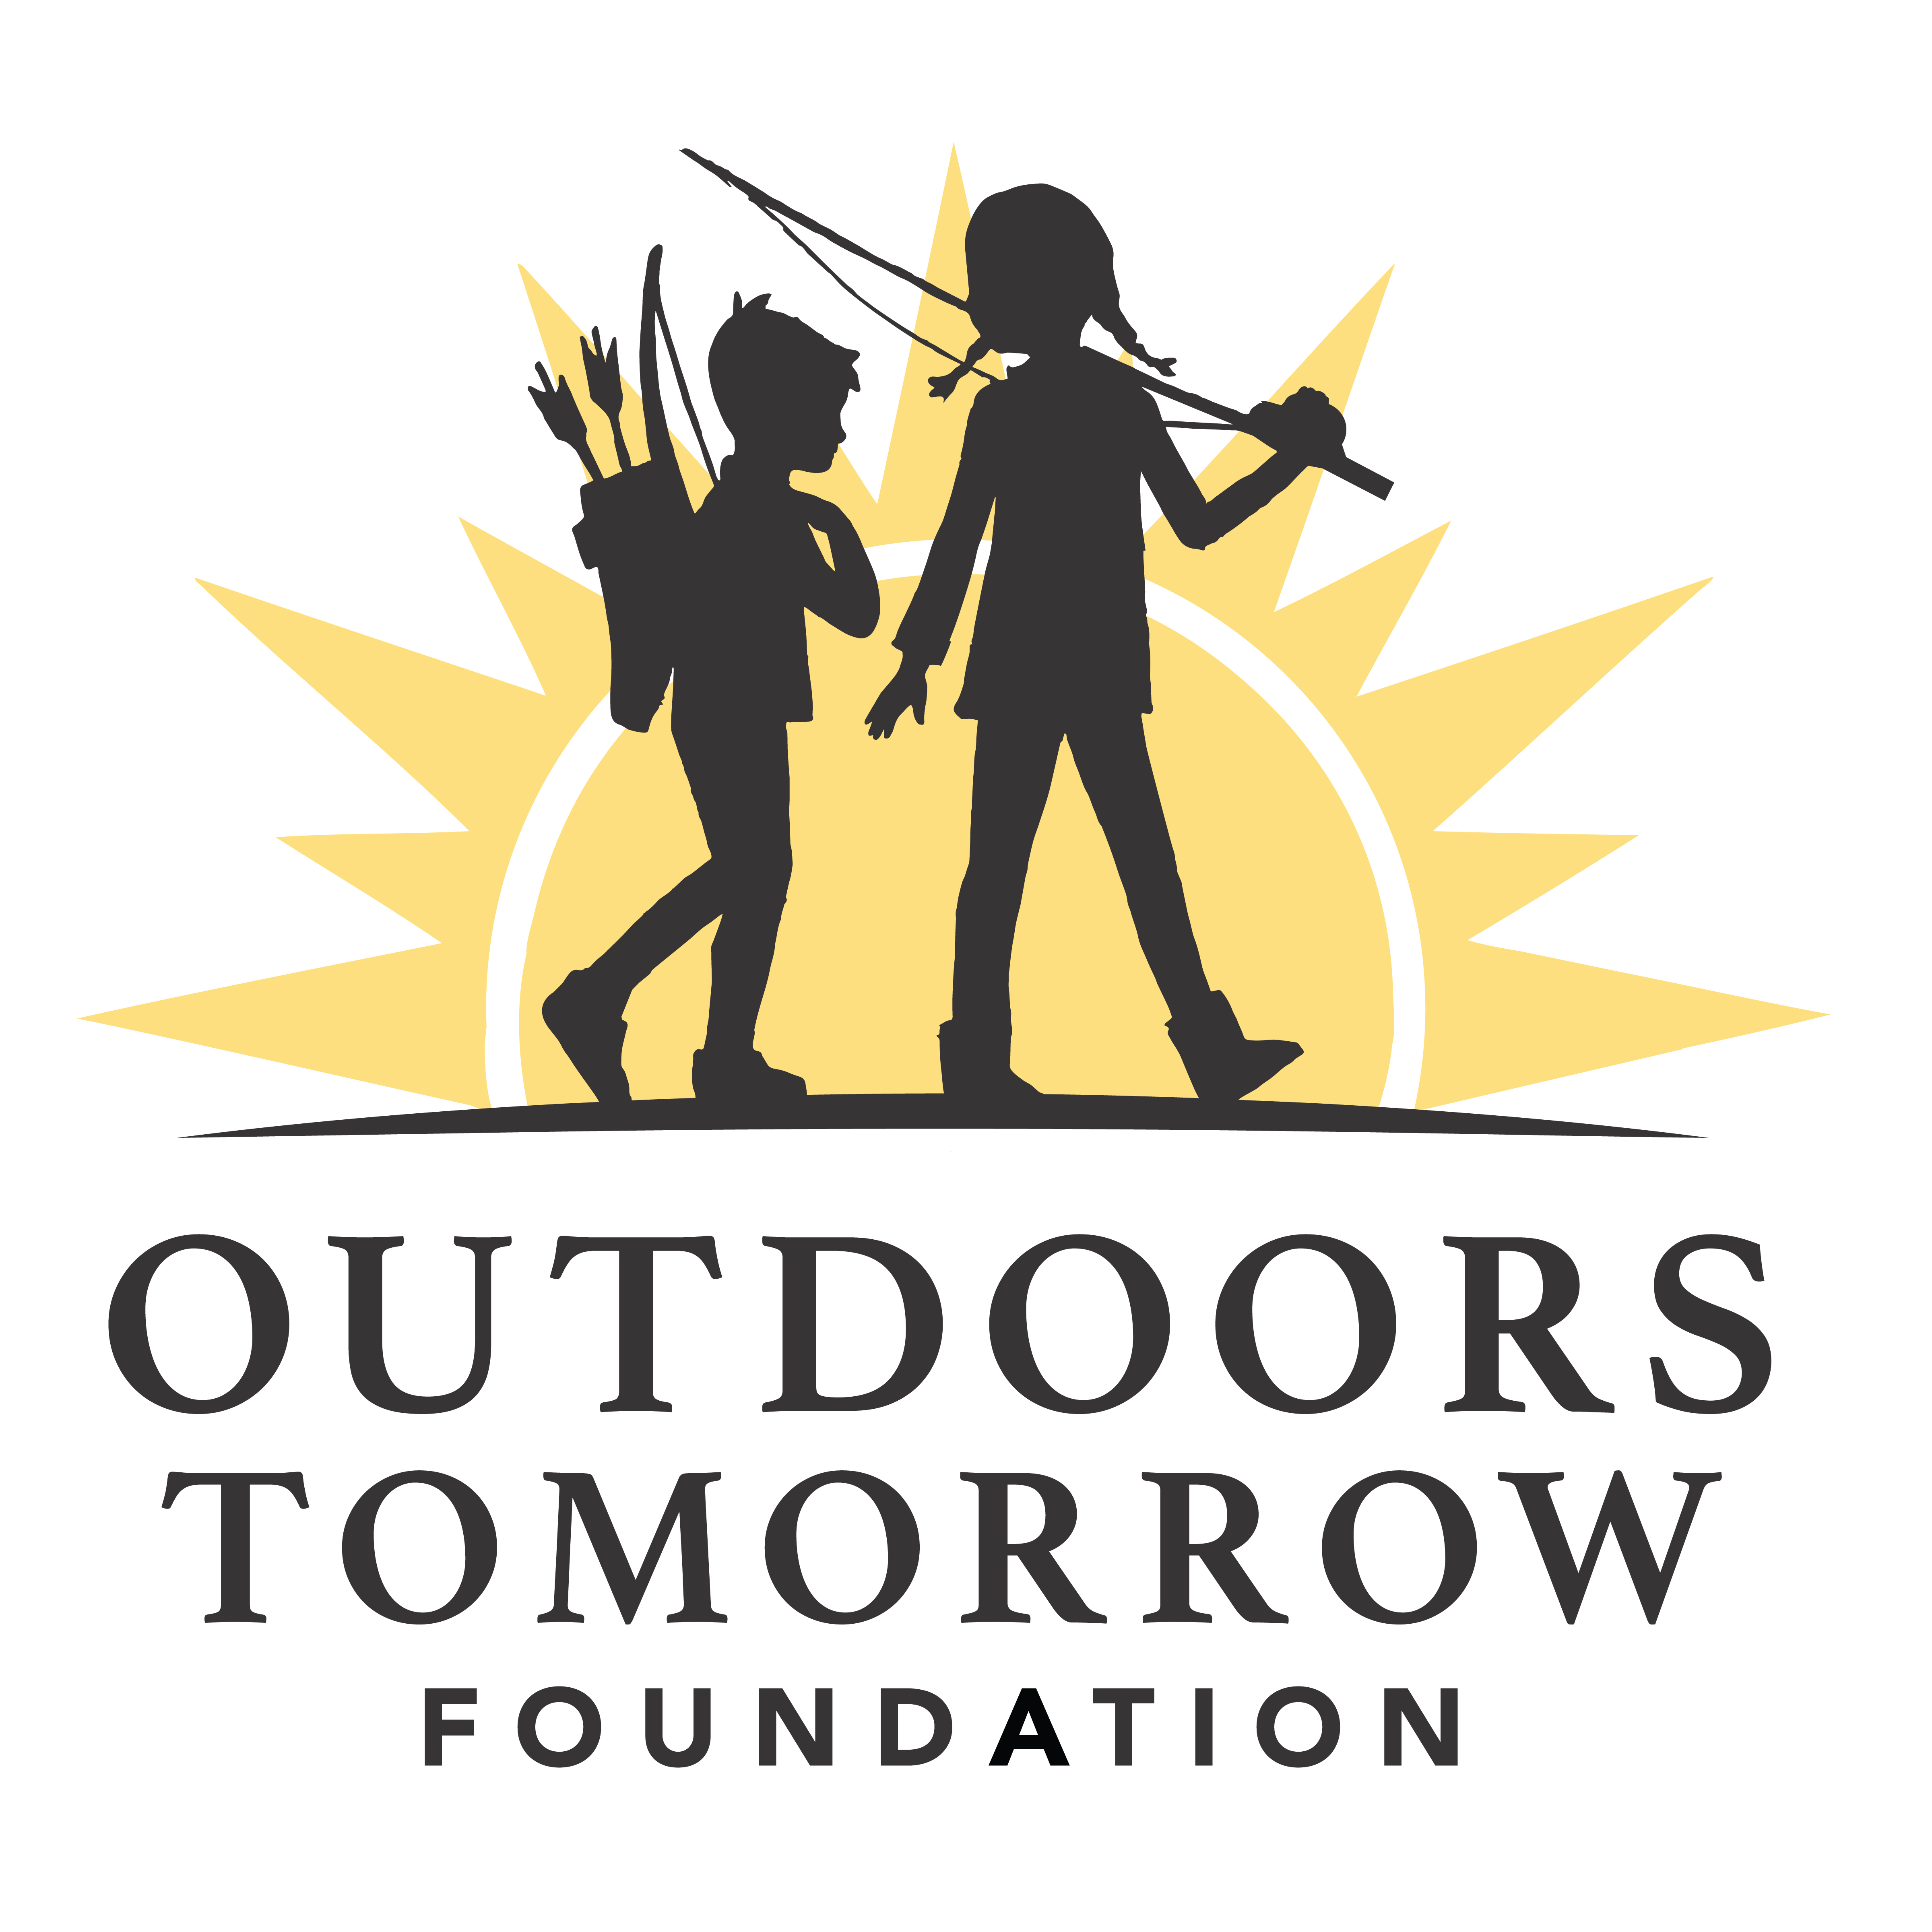 OTF sporting clays shoot to benefit thousands of children nationwide